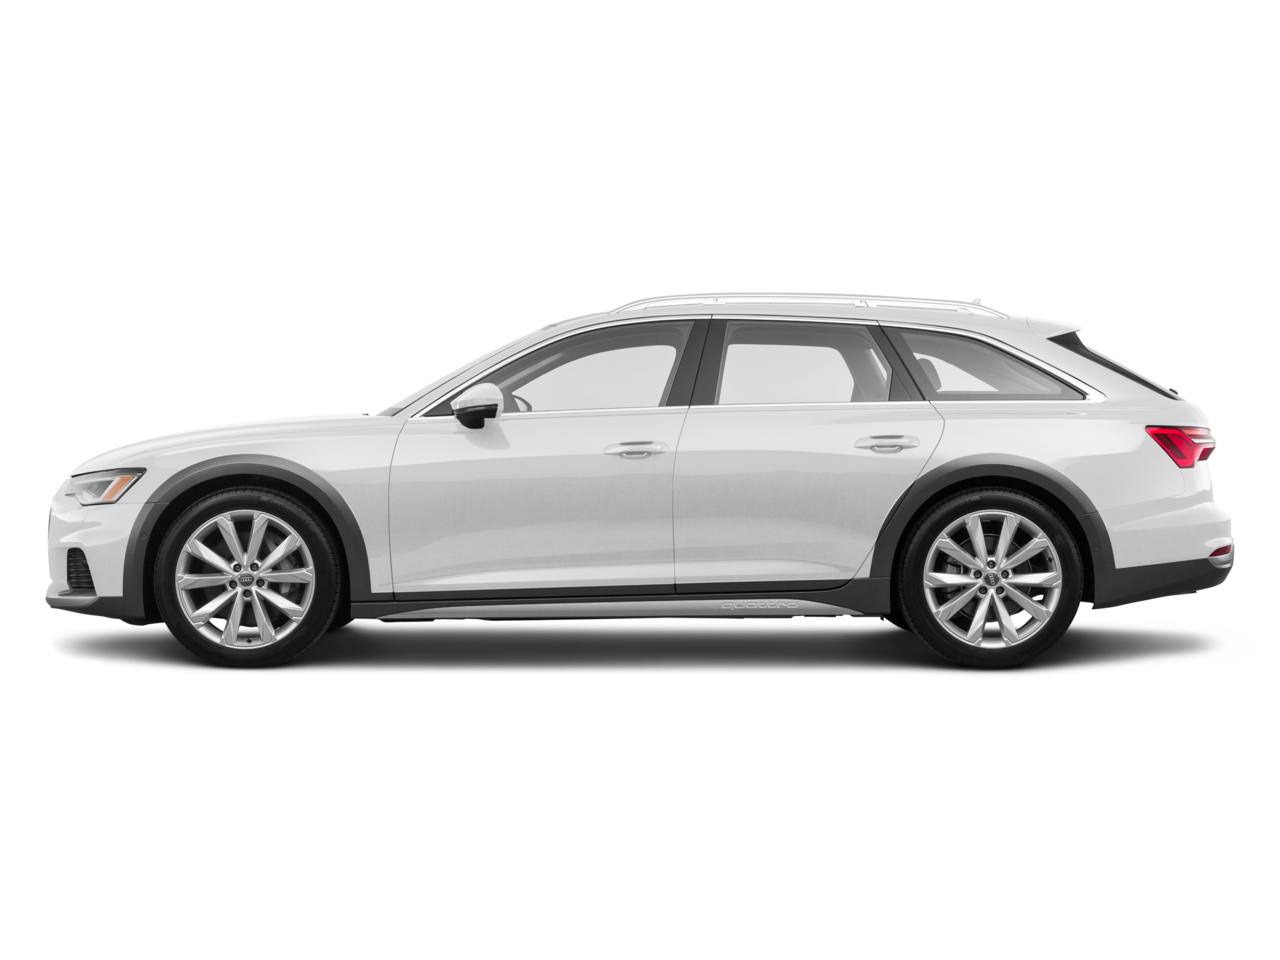 Audi A6 Allroad Background PNG Image